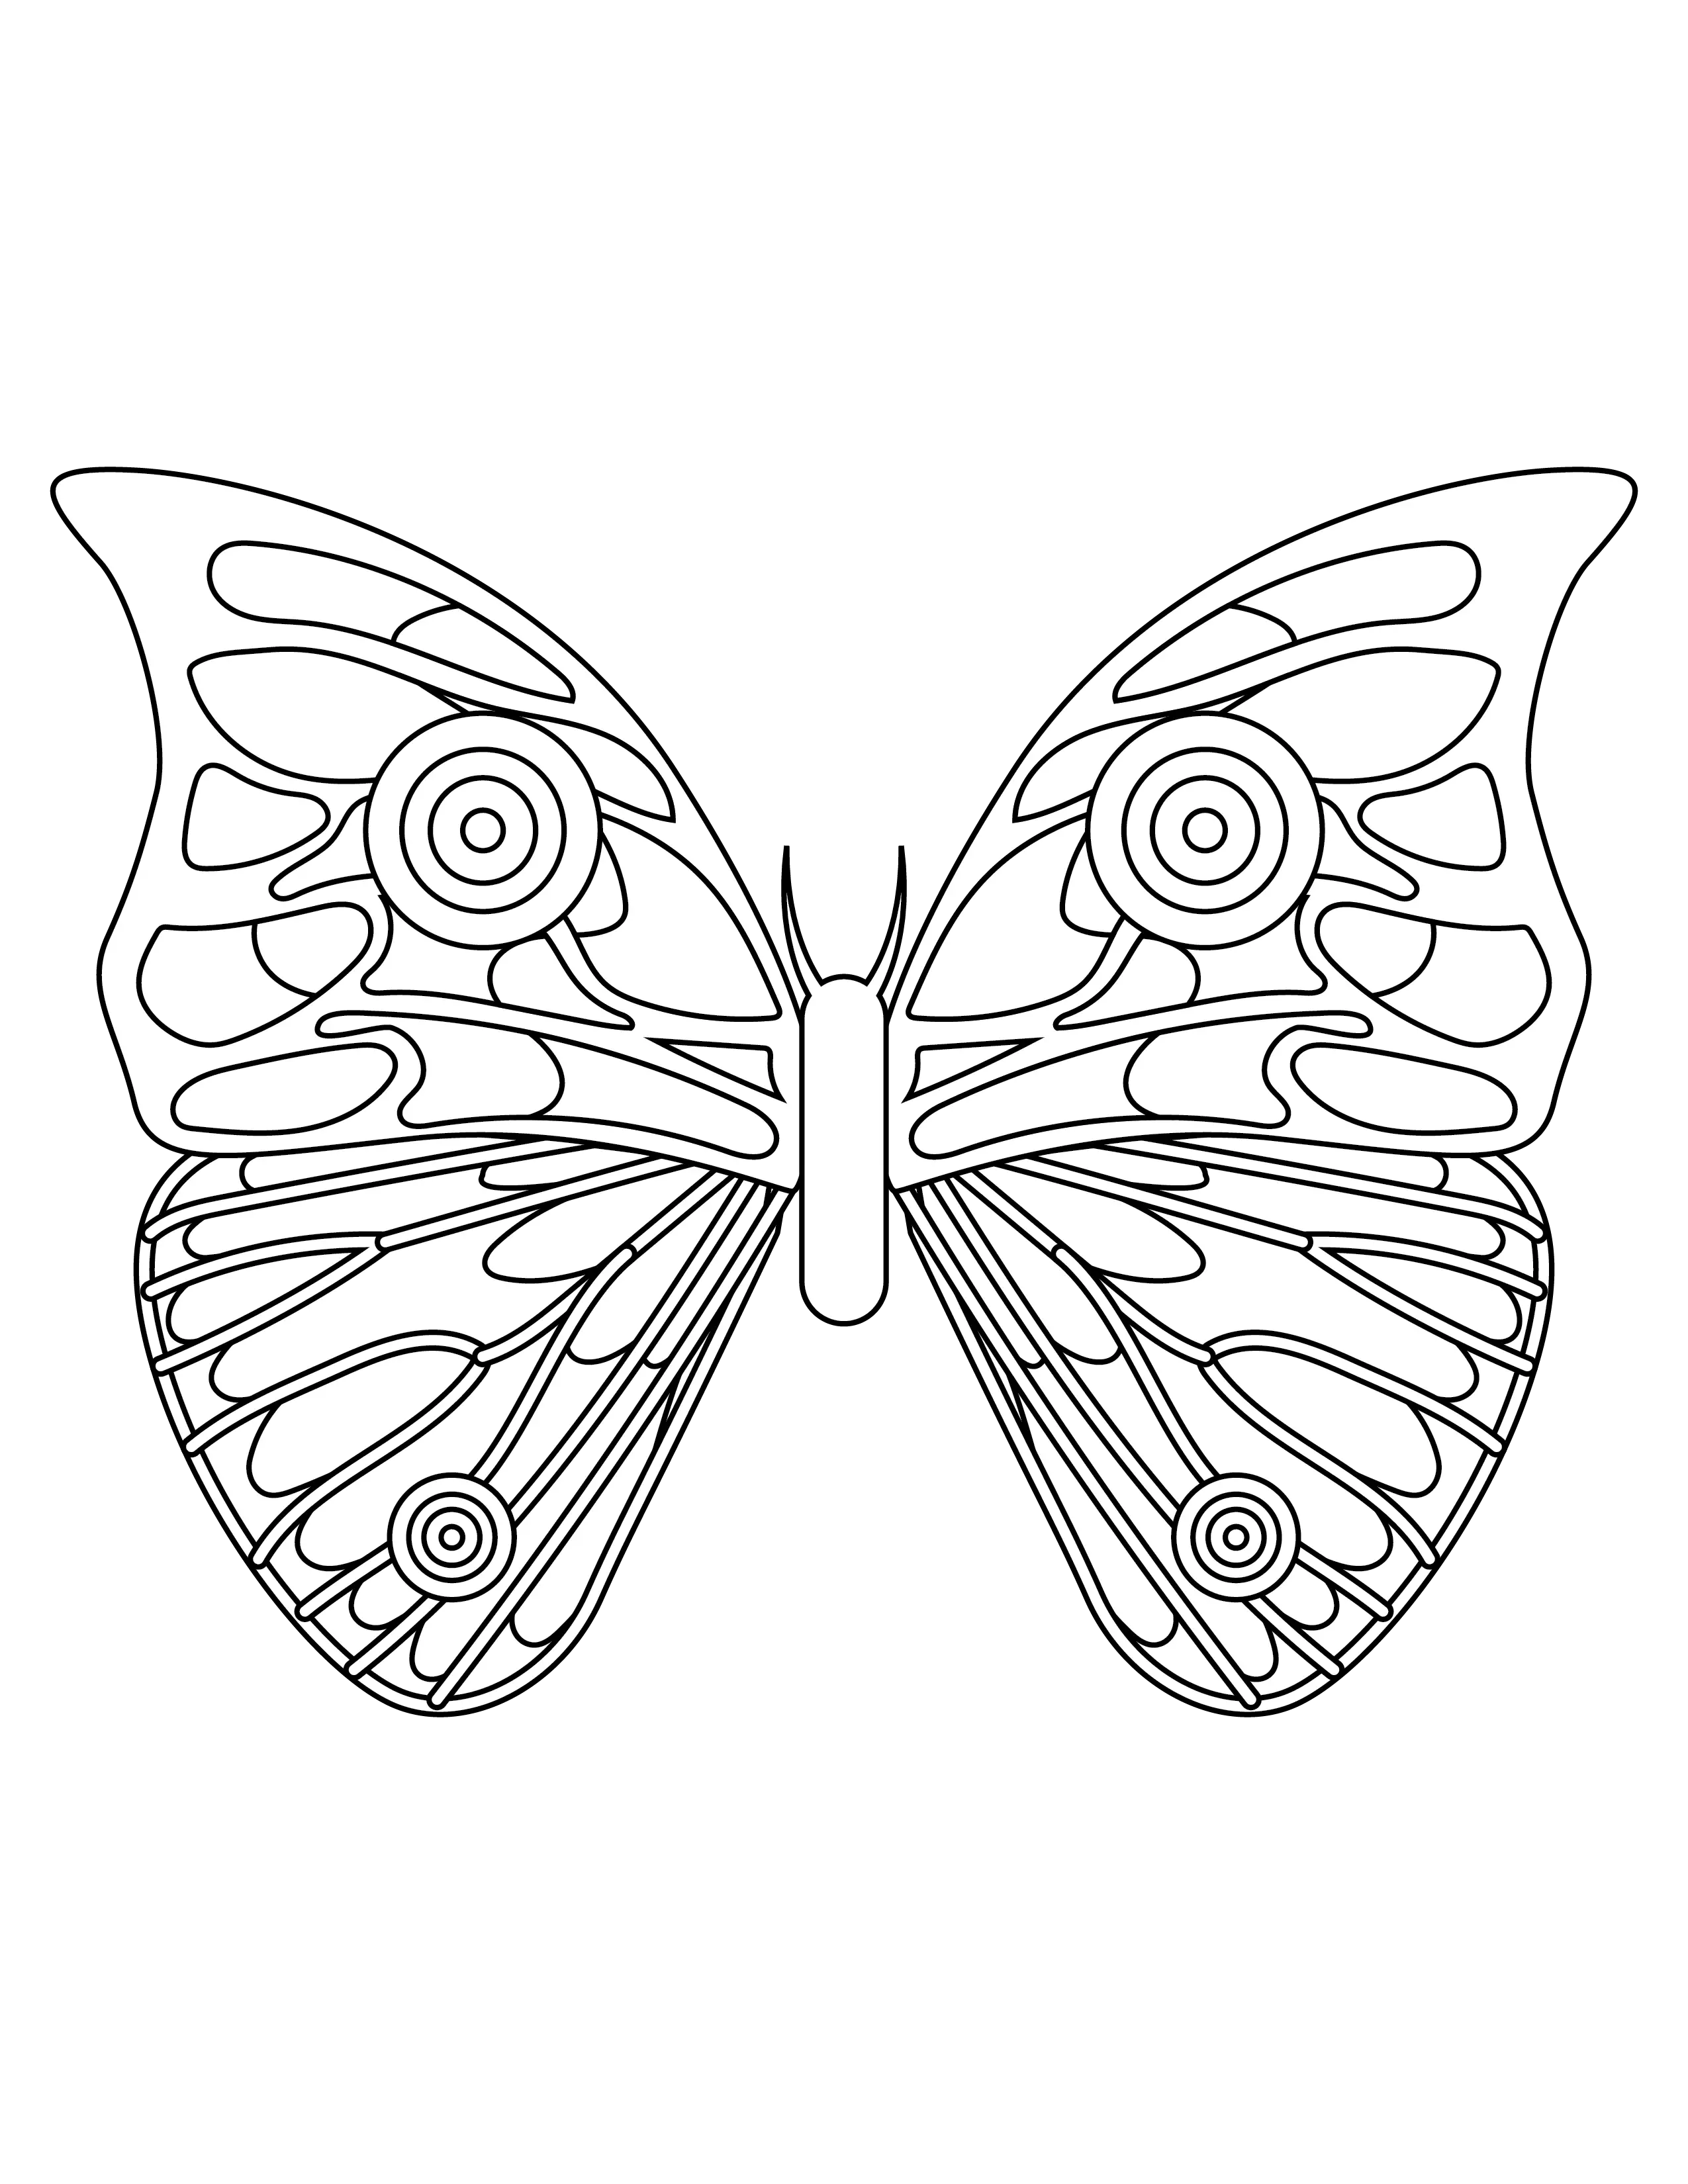 simple-butterfly-coloring-page-insect-for-kids-outline-doodle-illustration-printable